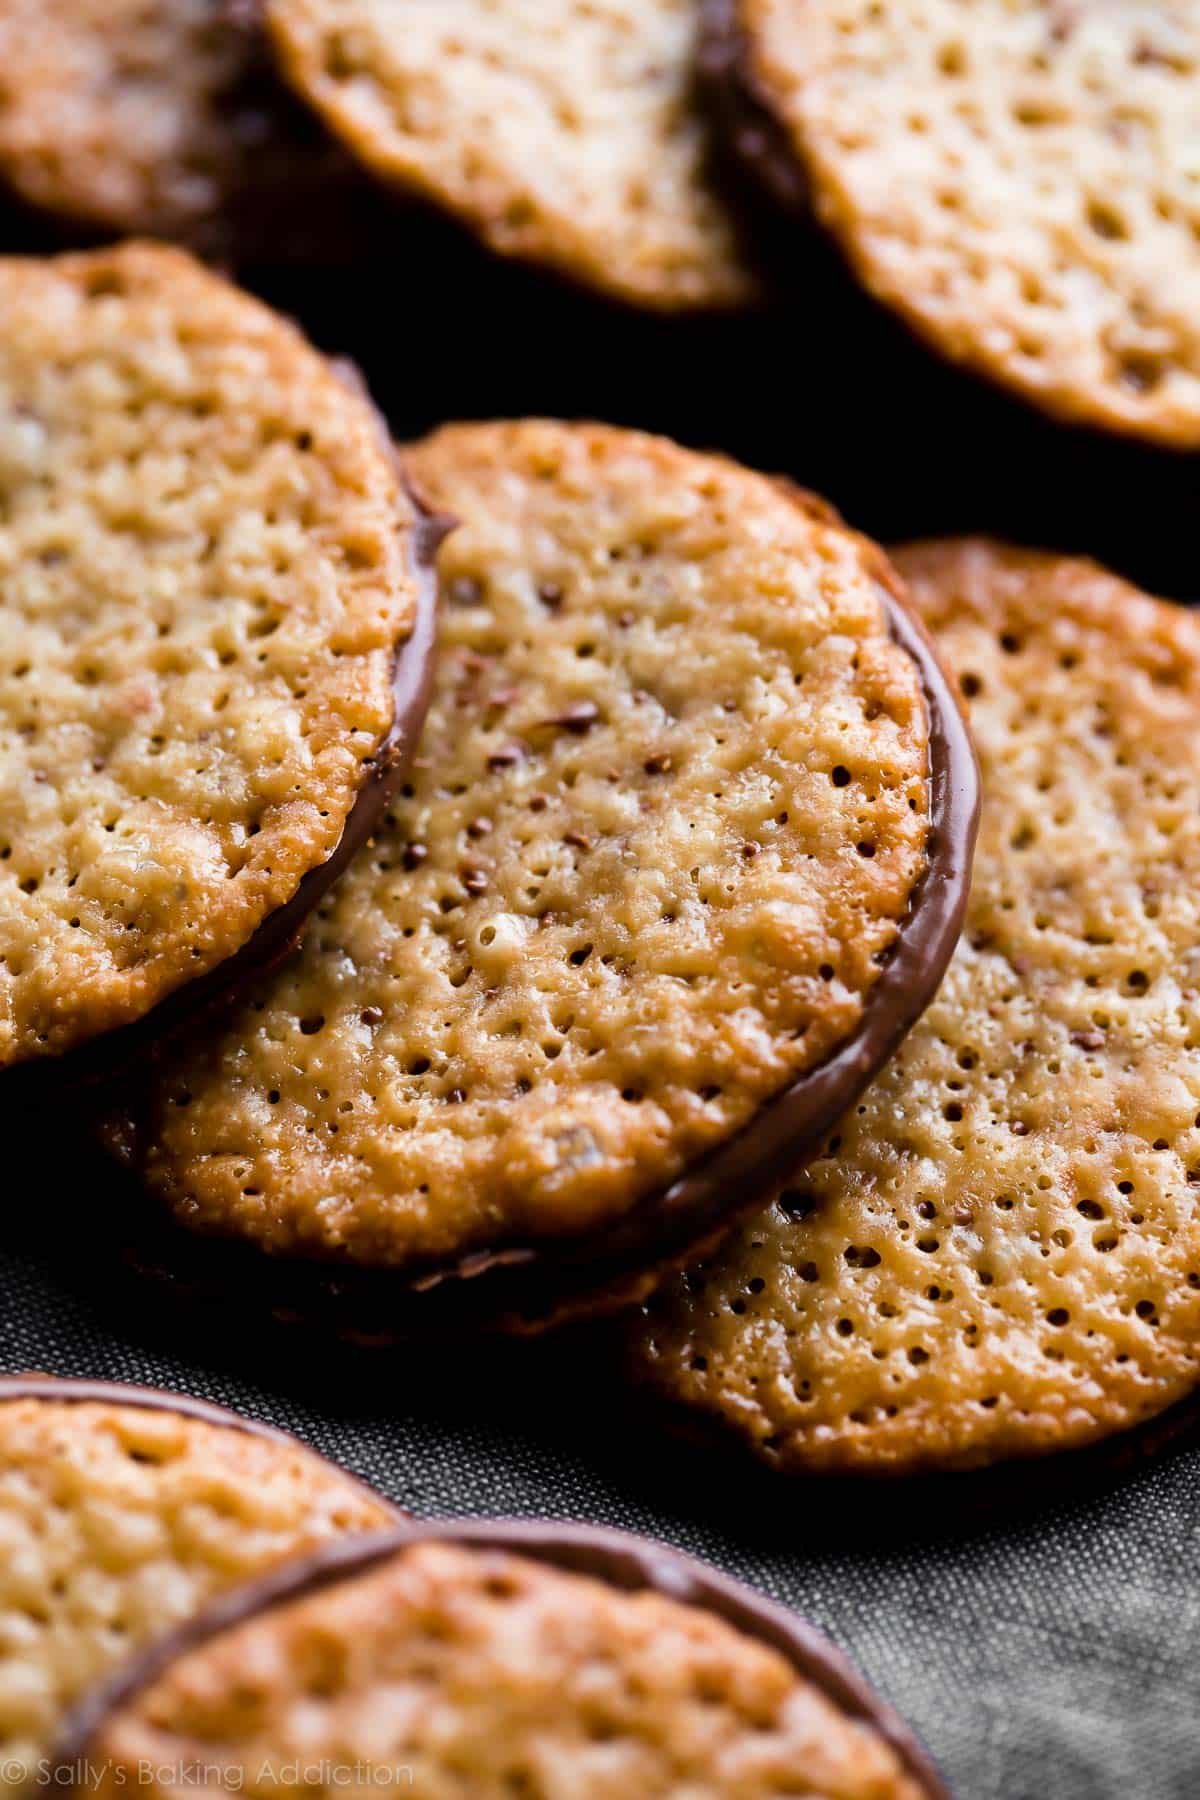 Almond lace cookies recipe